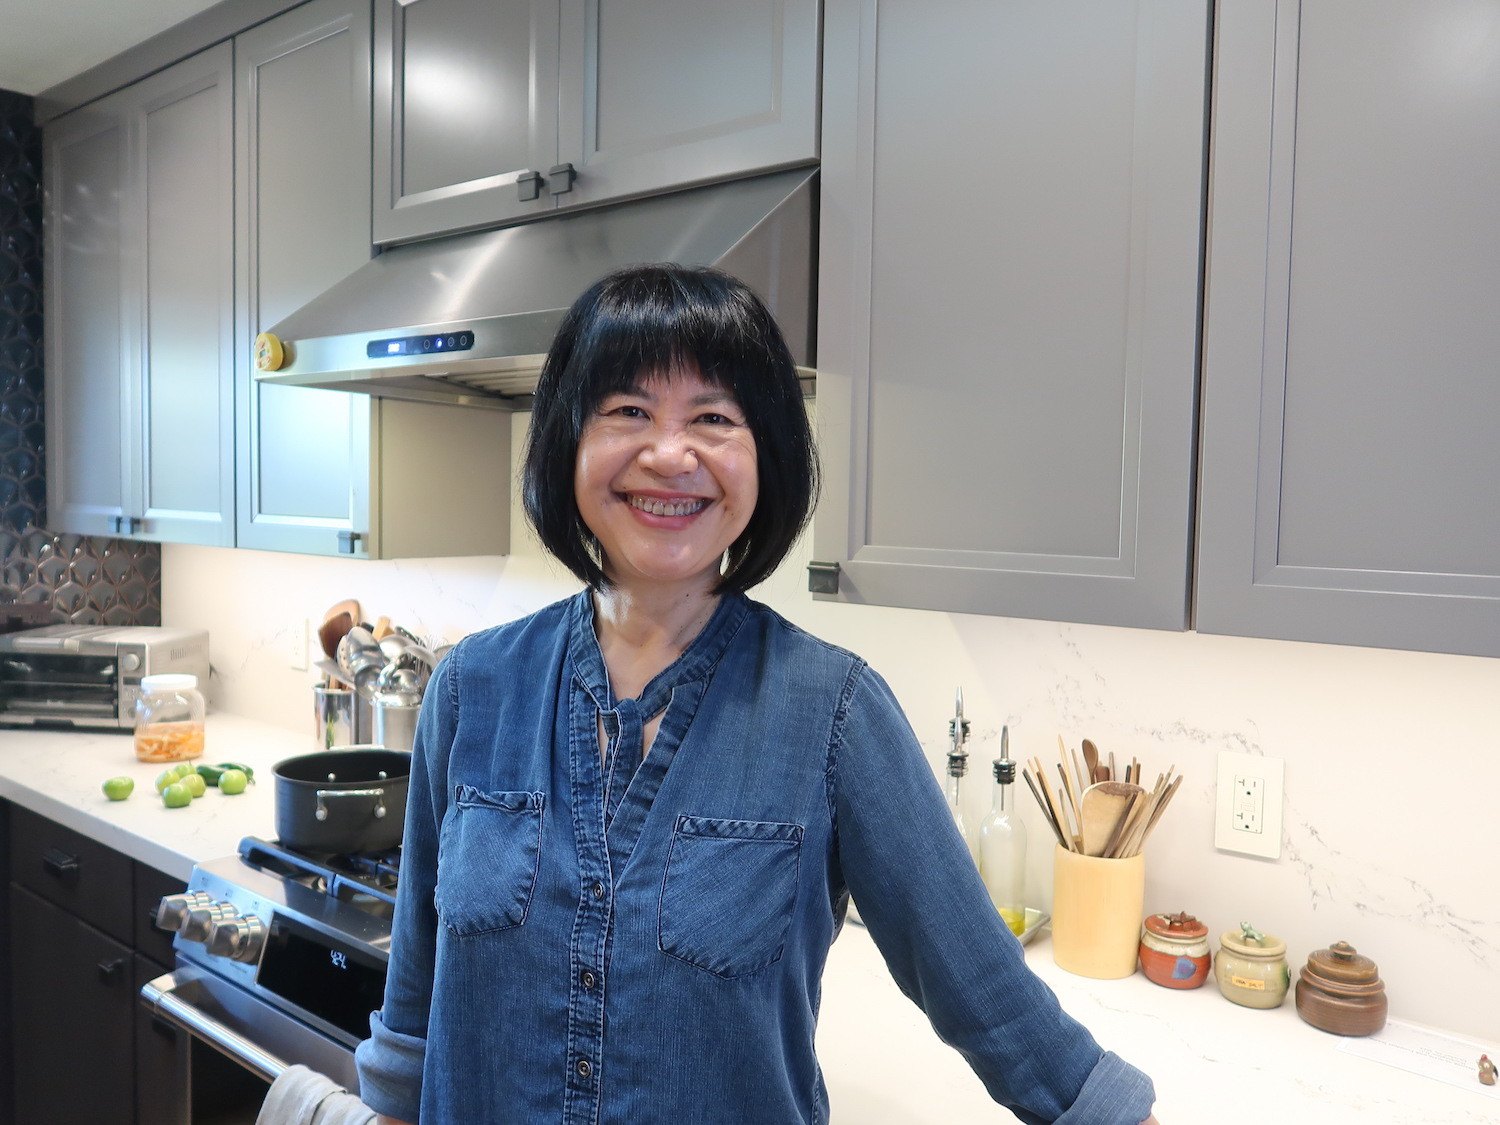 A portrait of cookbook author and chef Andrea Nguyen standing in her kitchen. September 2021